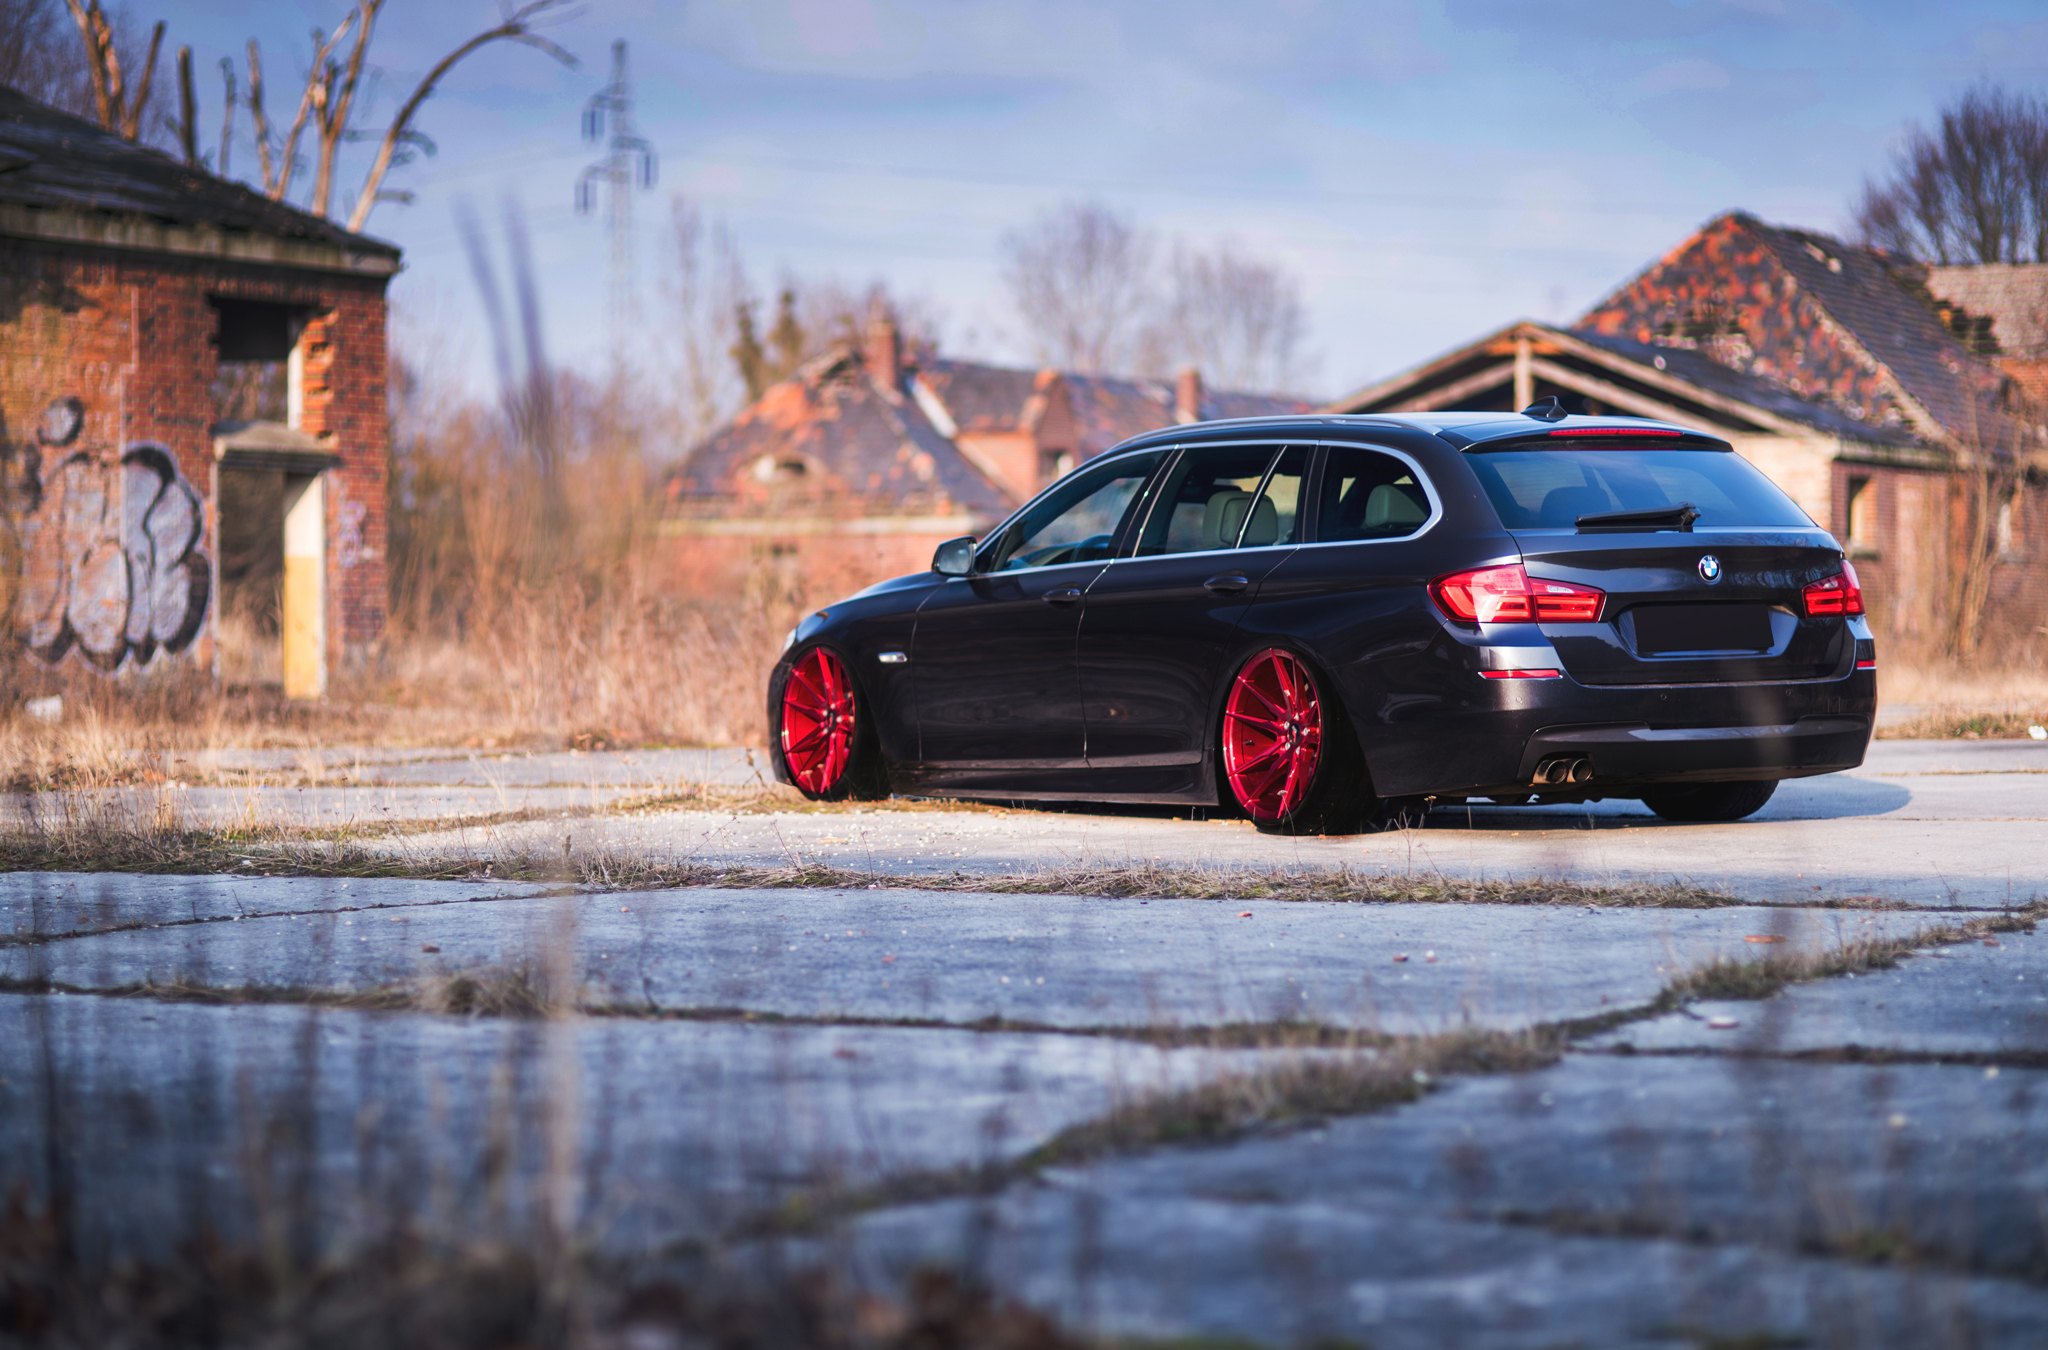 Roofline Spoiler with Light on Black BMW 5-Series - Photo by JR Wheels